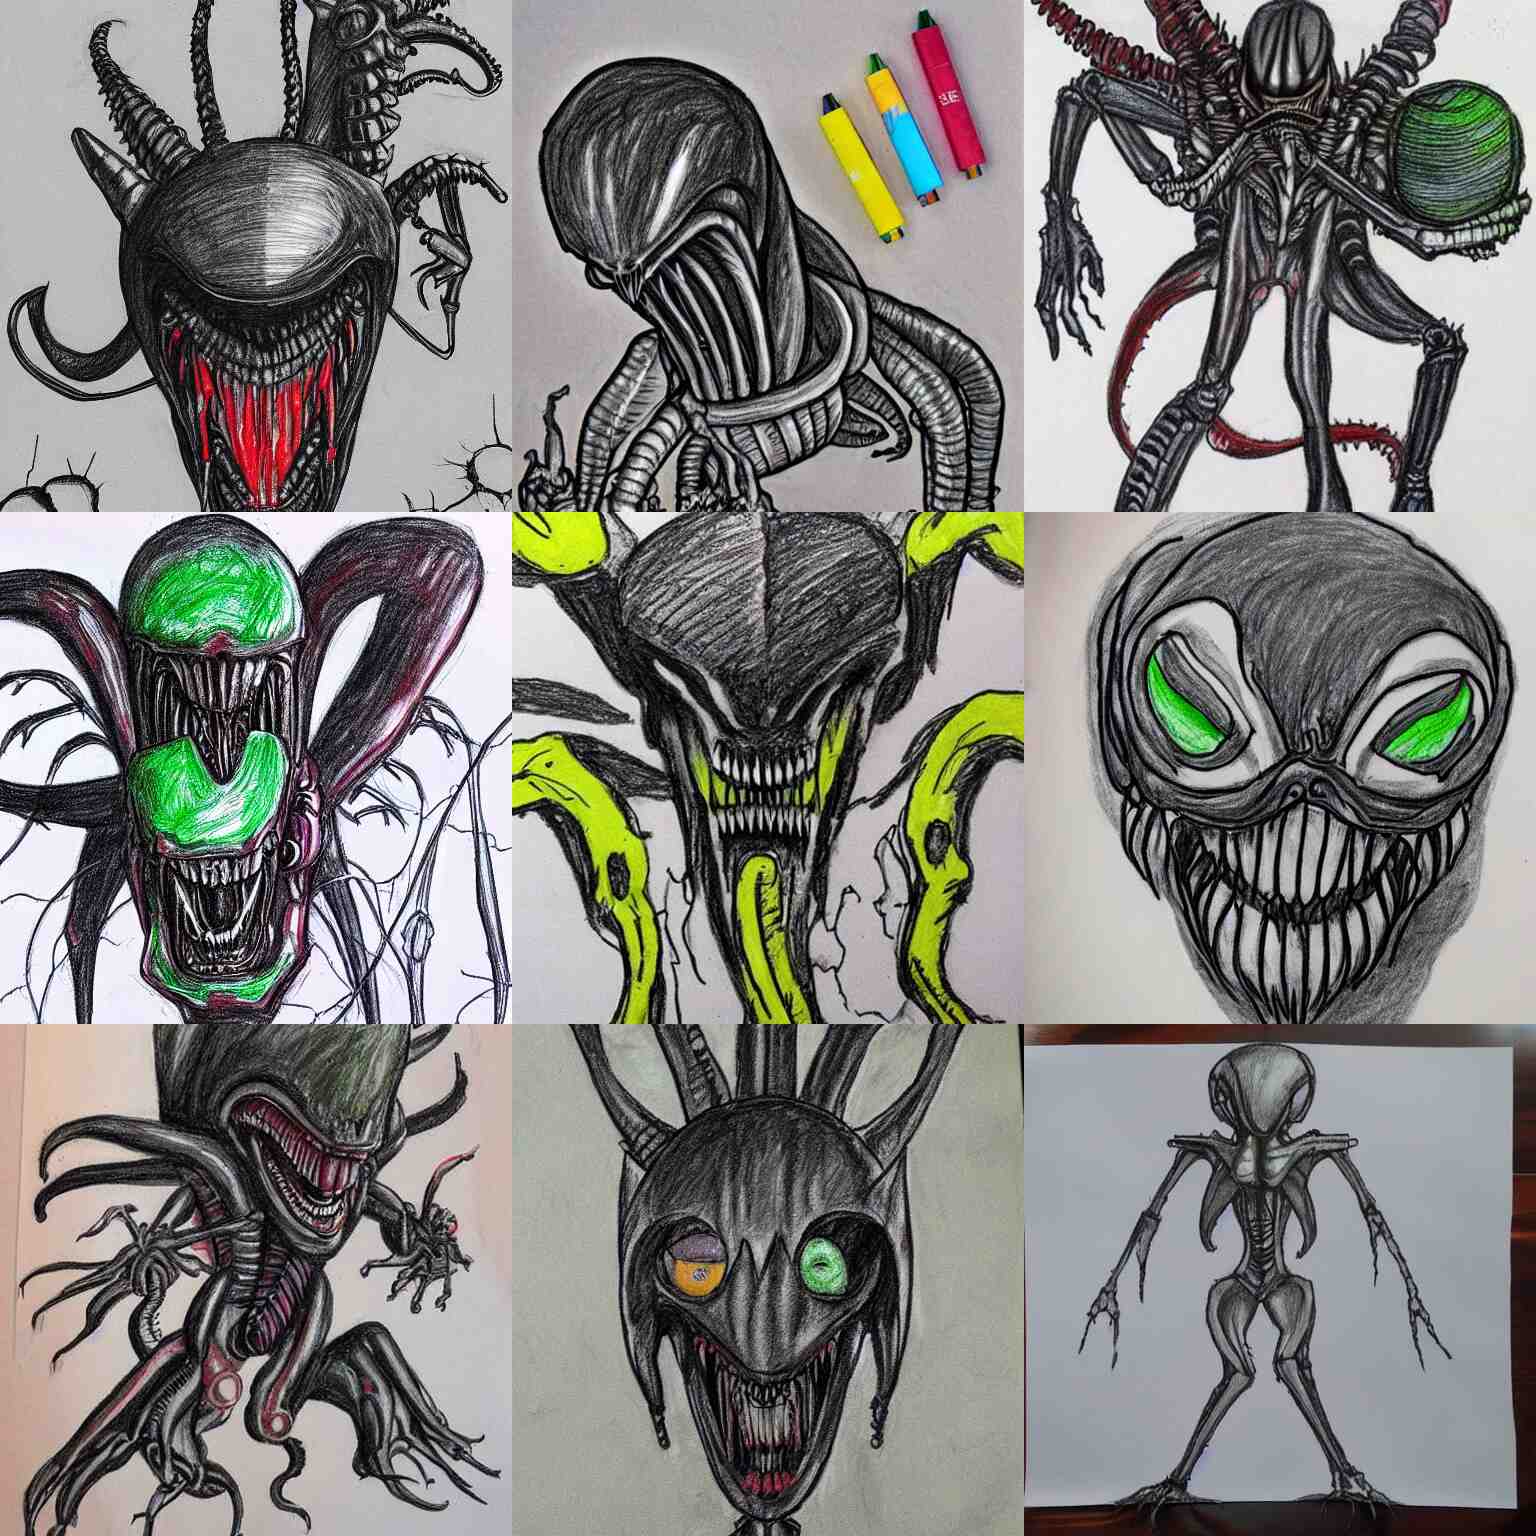 the new aliens xenomorph creature, designed by a 3 rd grader, crayon, children ’ s drawing, crude, rudimentary, 